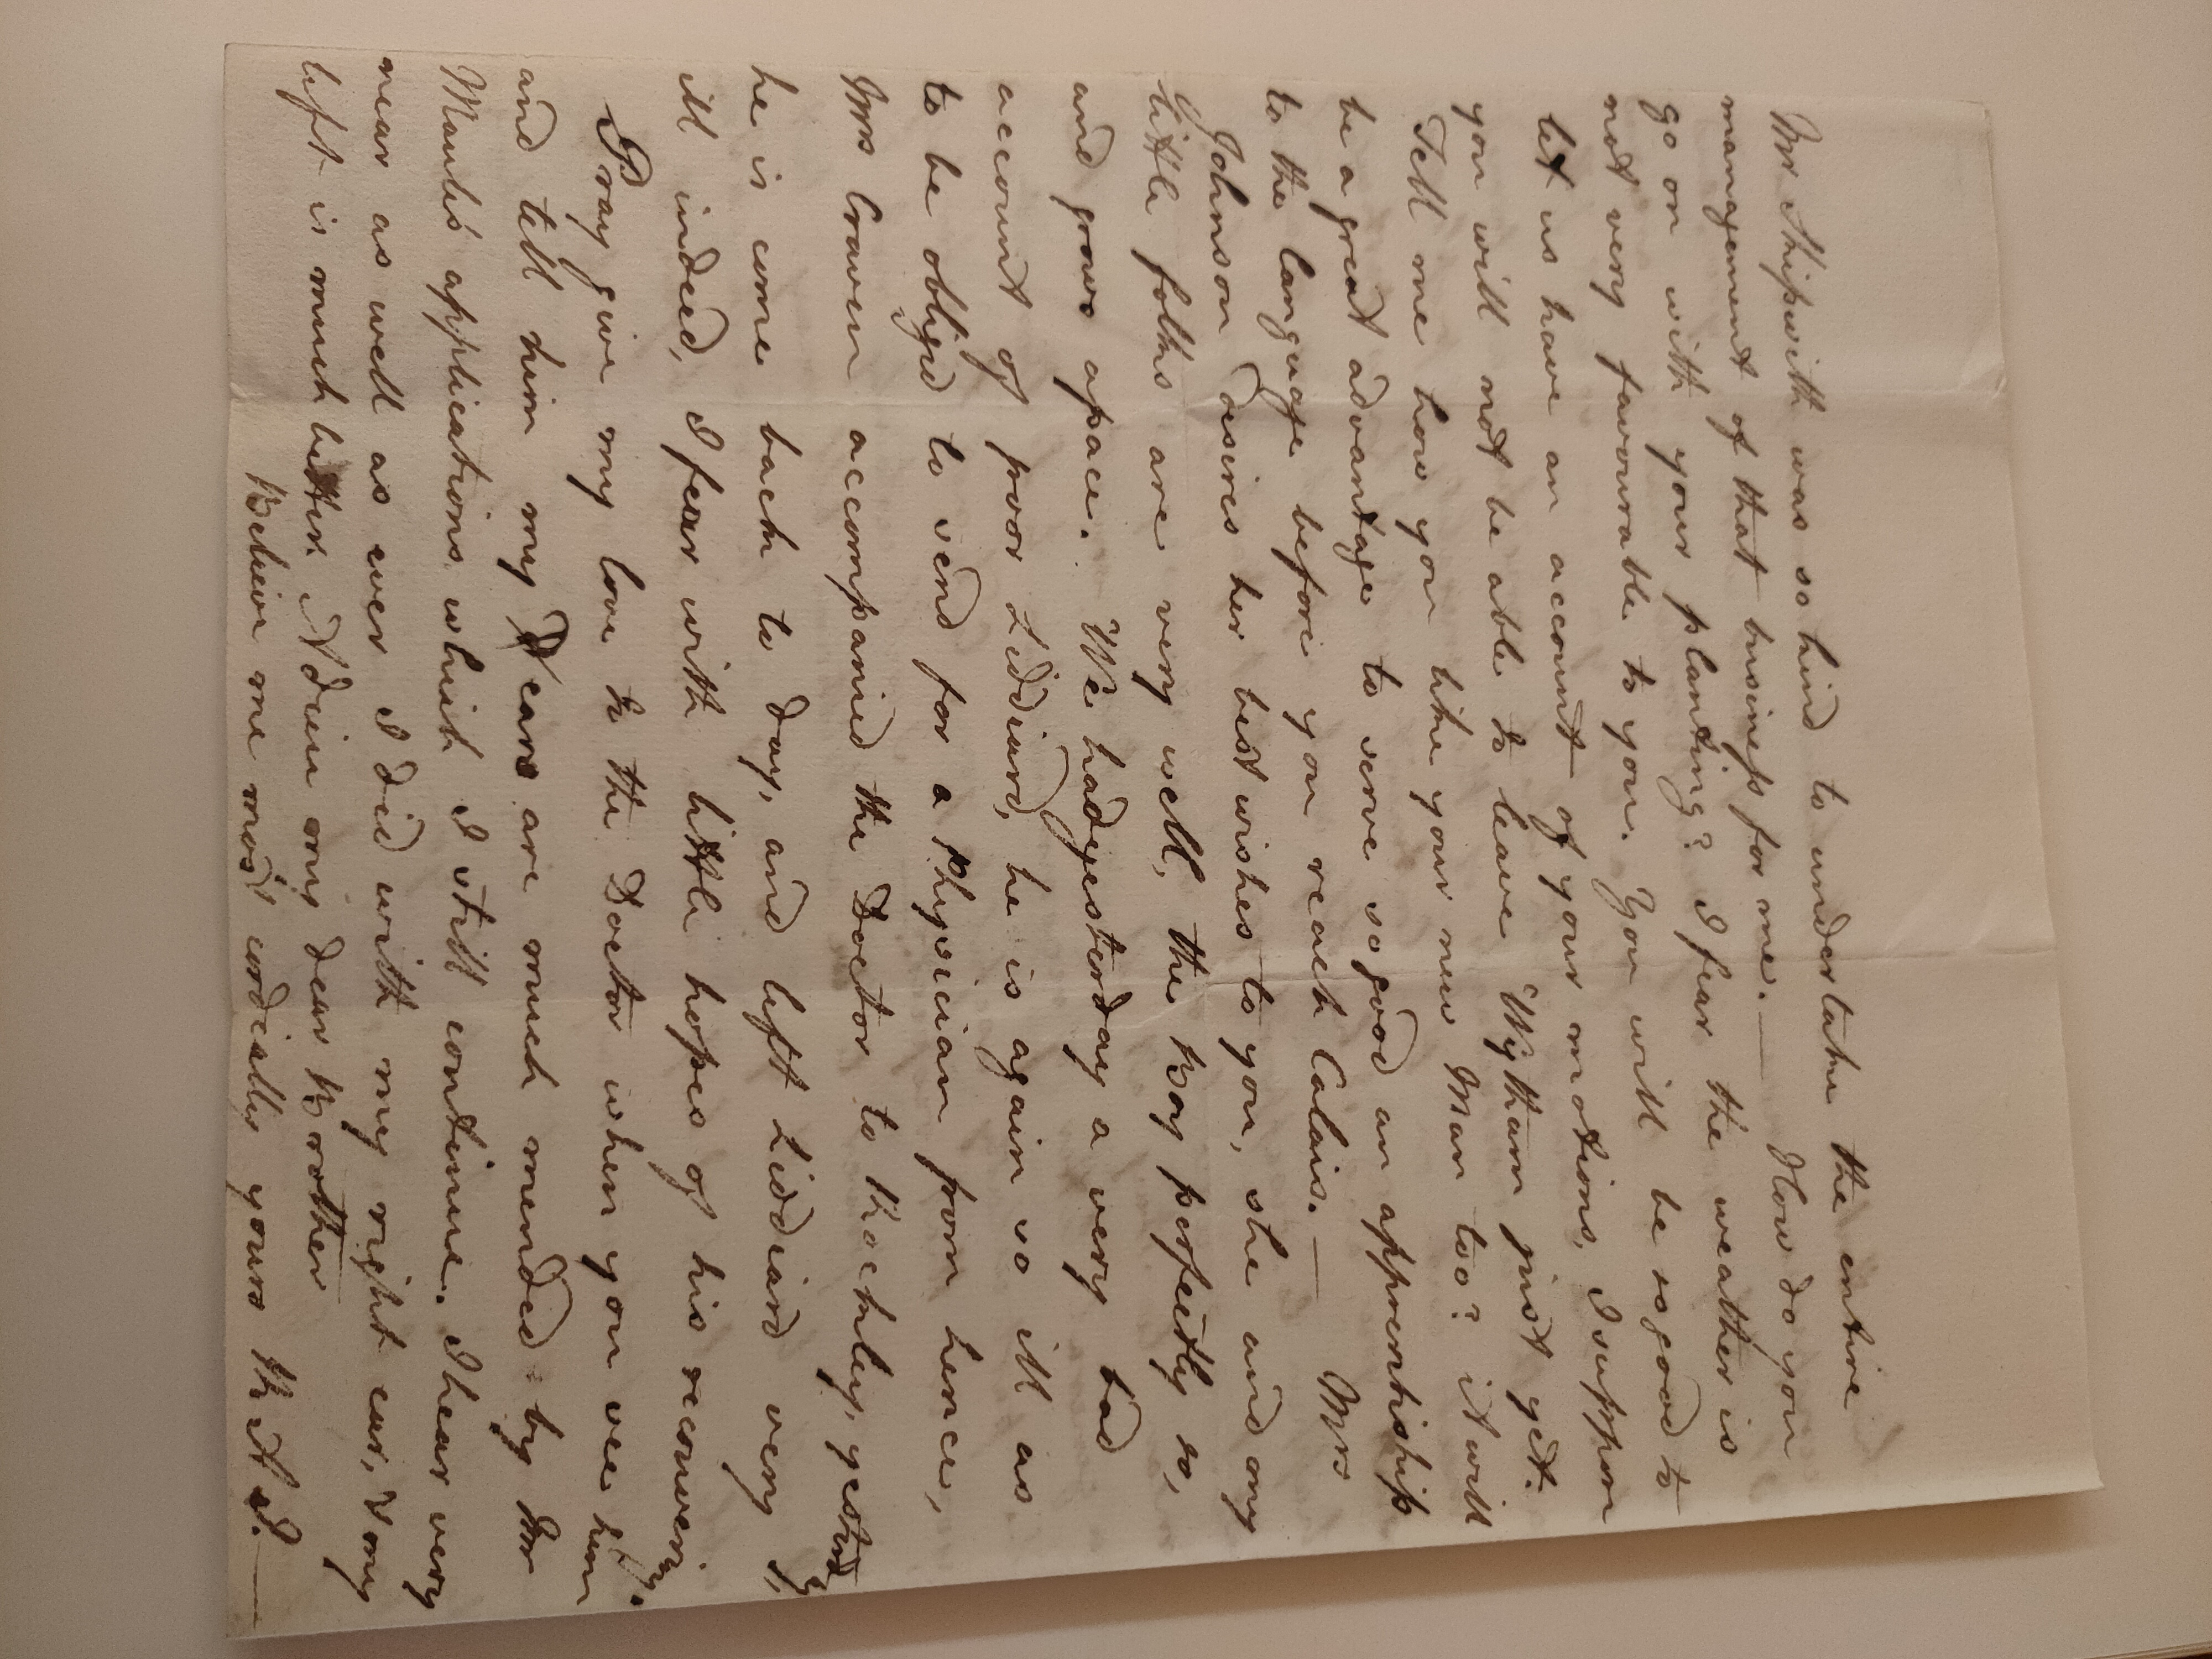 Image #4 of letter: Robert Augustus Johnson to George William Johnson, 6 March 1778